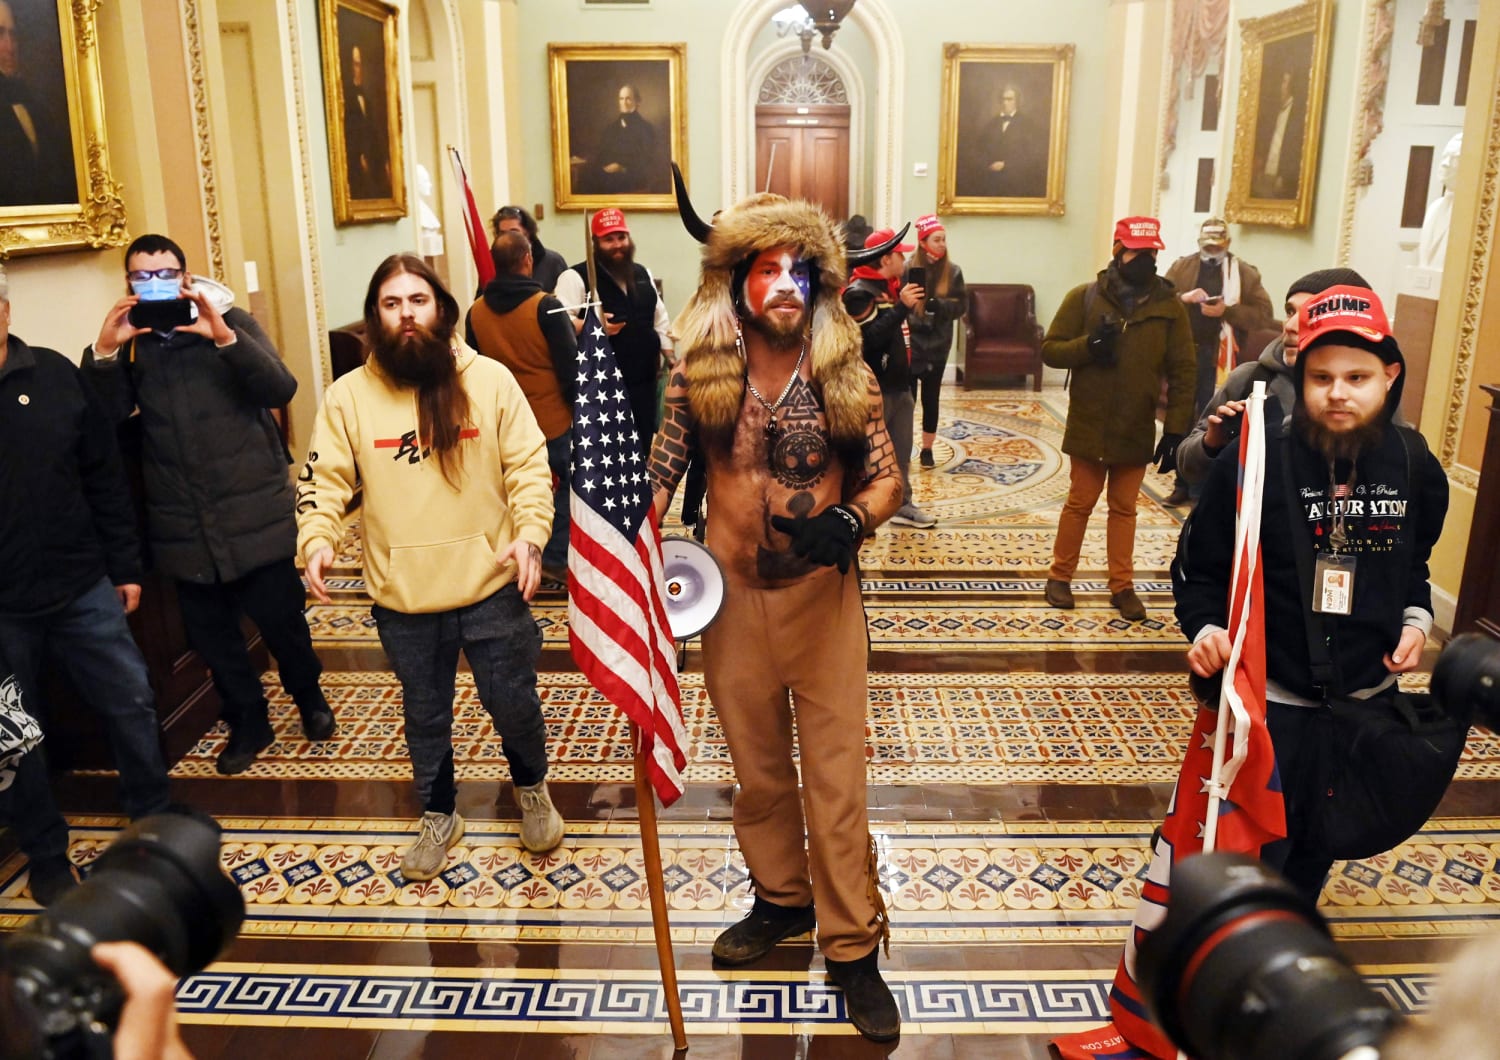 Capitol rioter in horned hat gloats as feds work to identify suspects